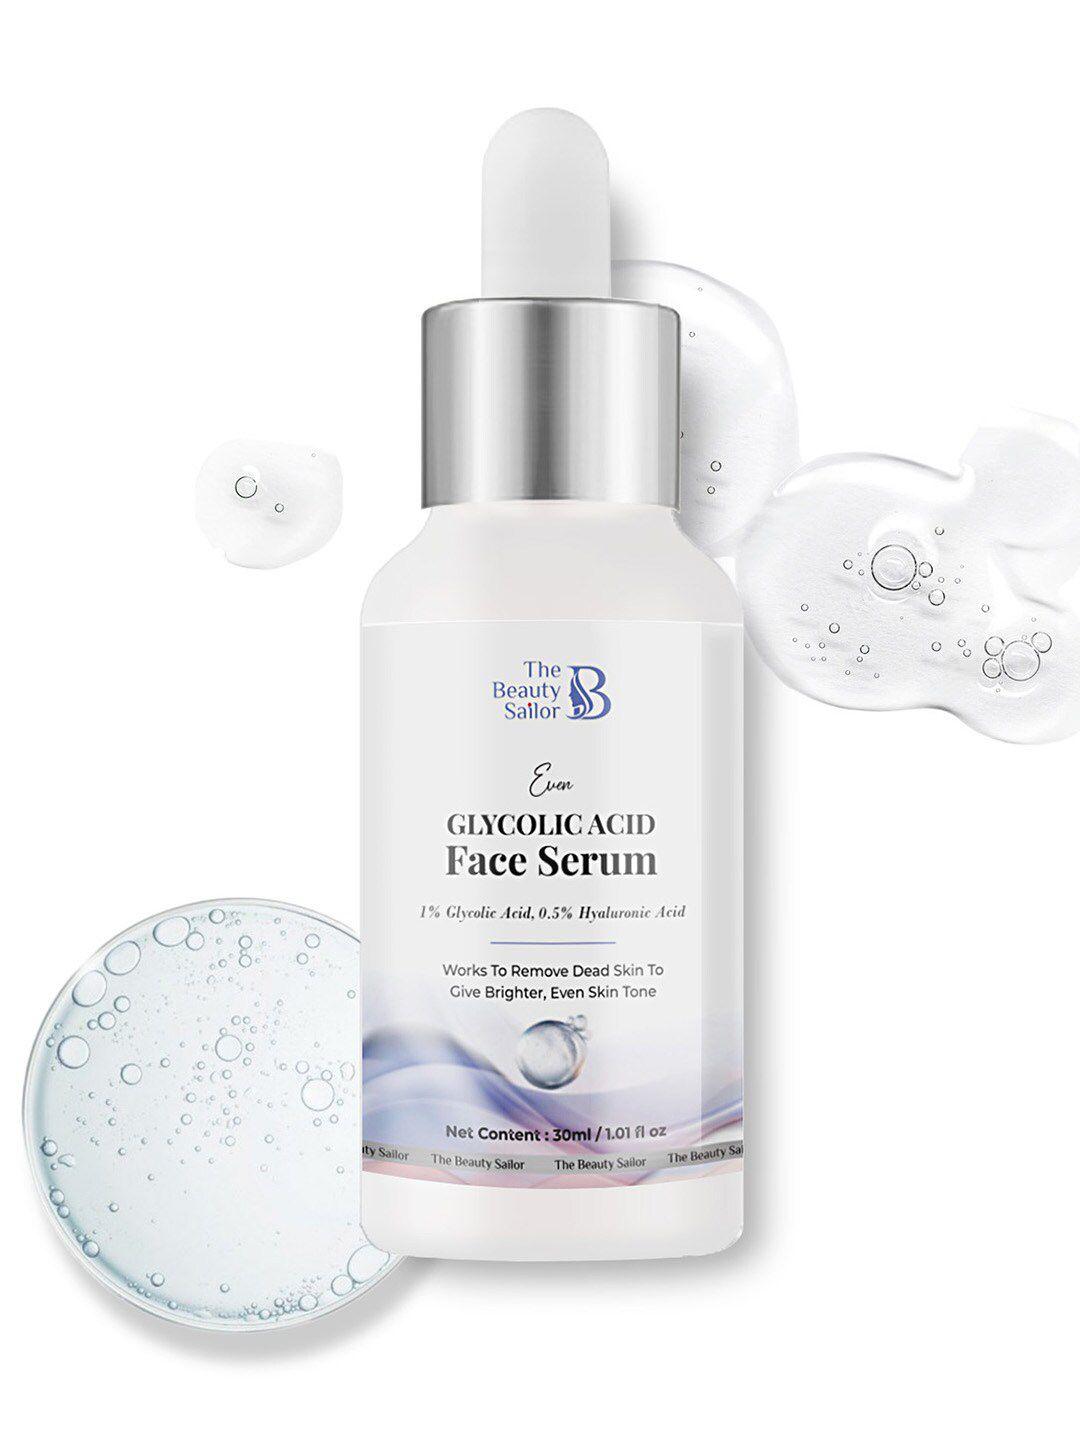 the beauty sailor even glycolic acid face serum with hyaluronic acid & aloe vera 30ml